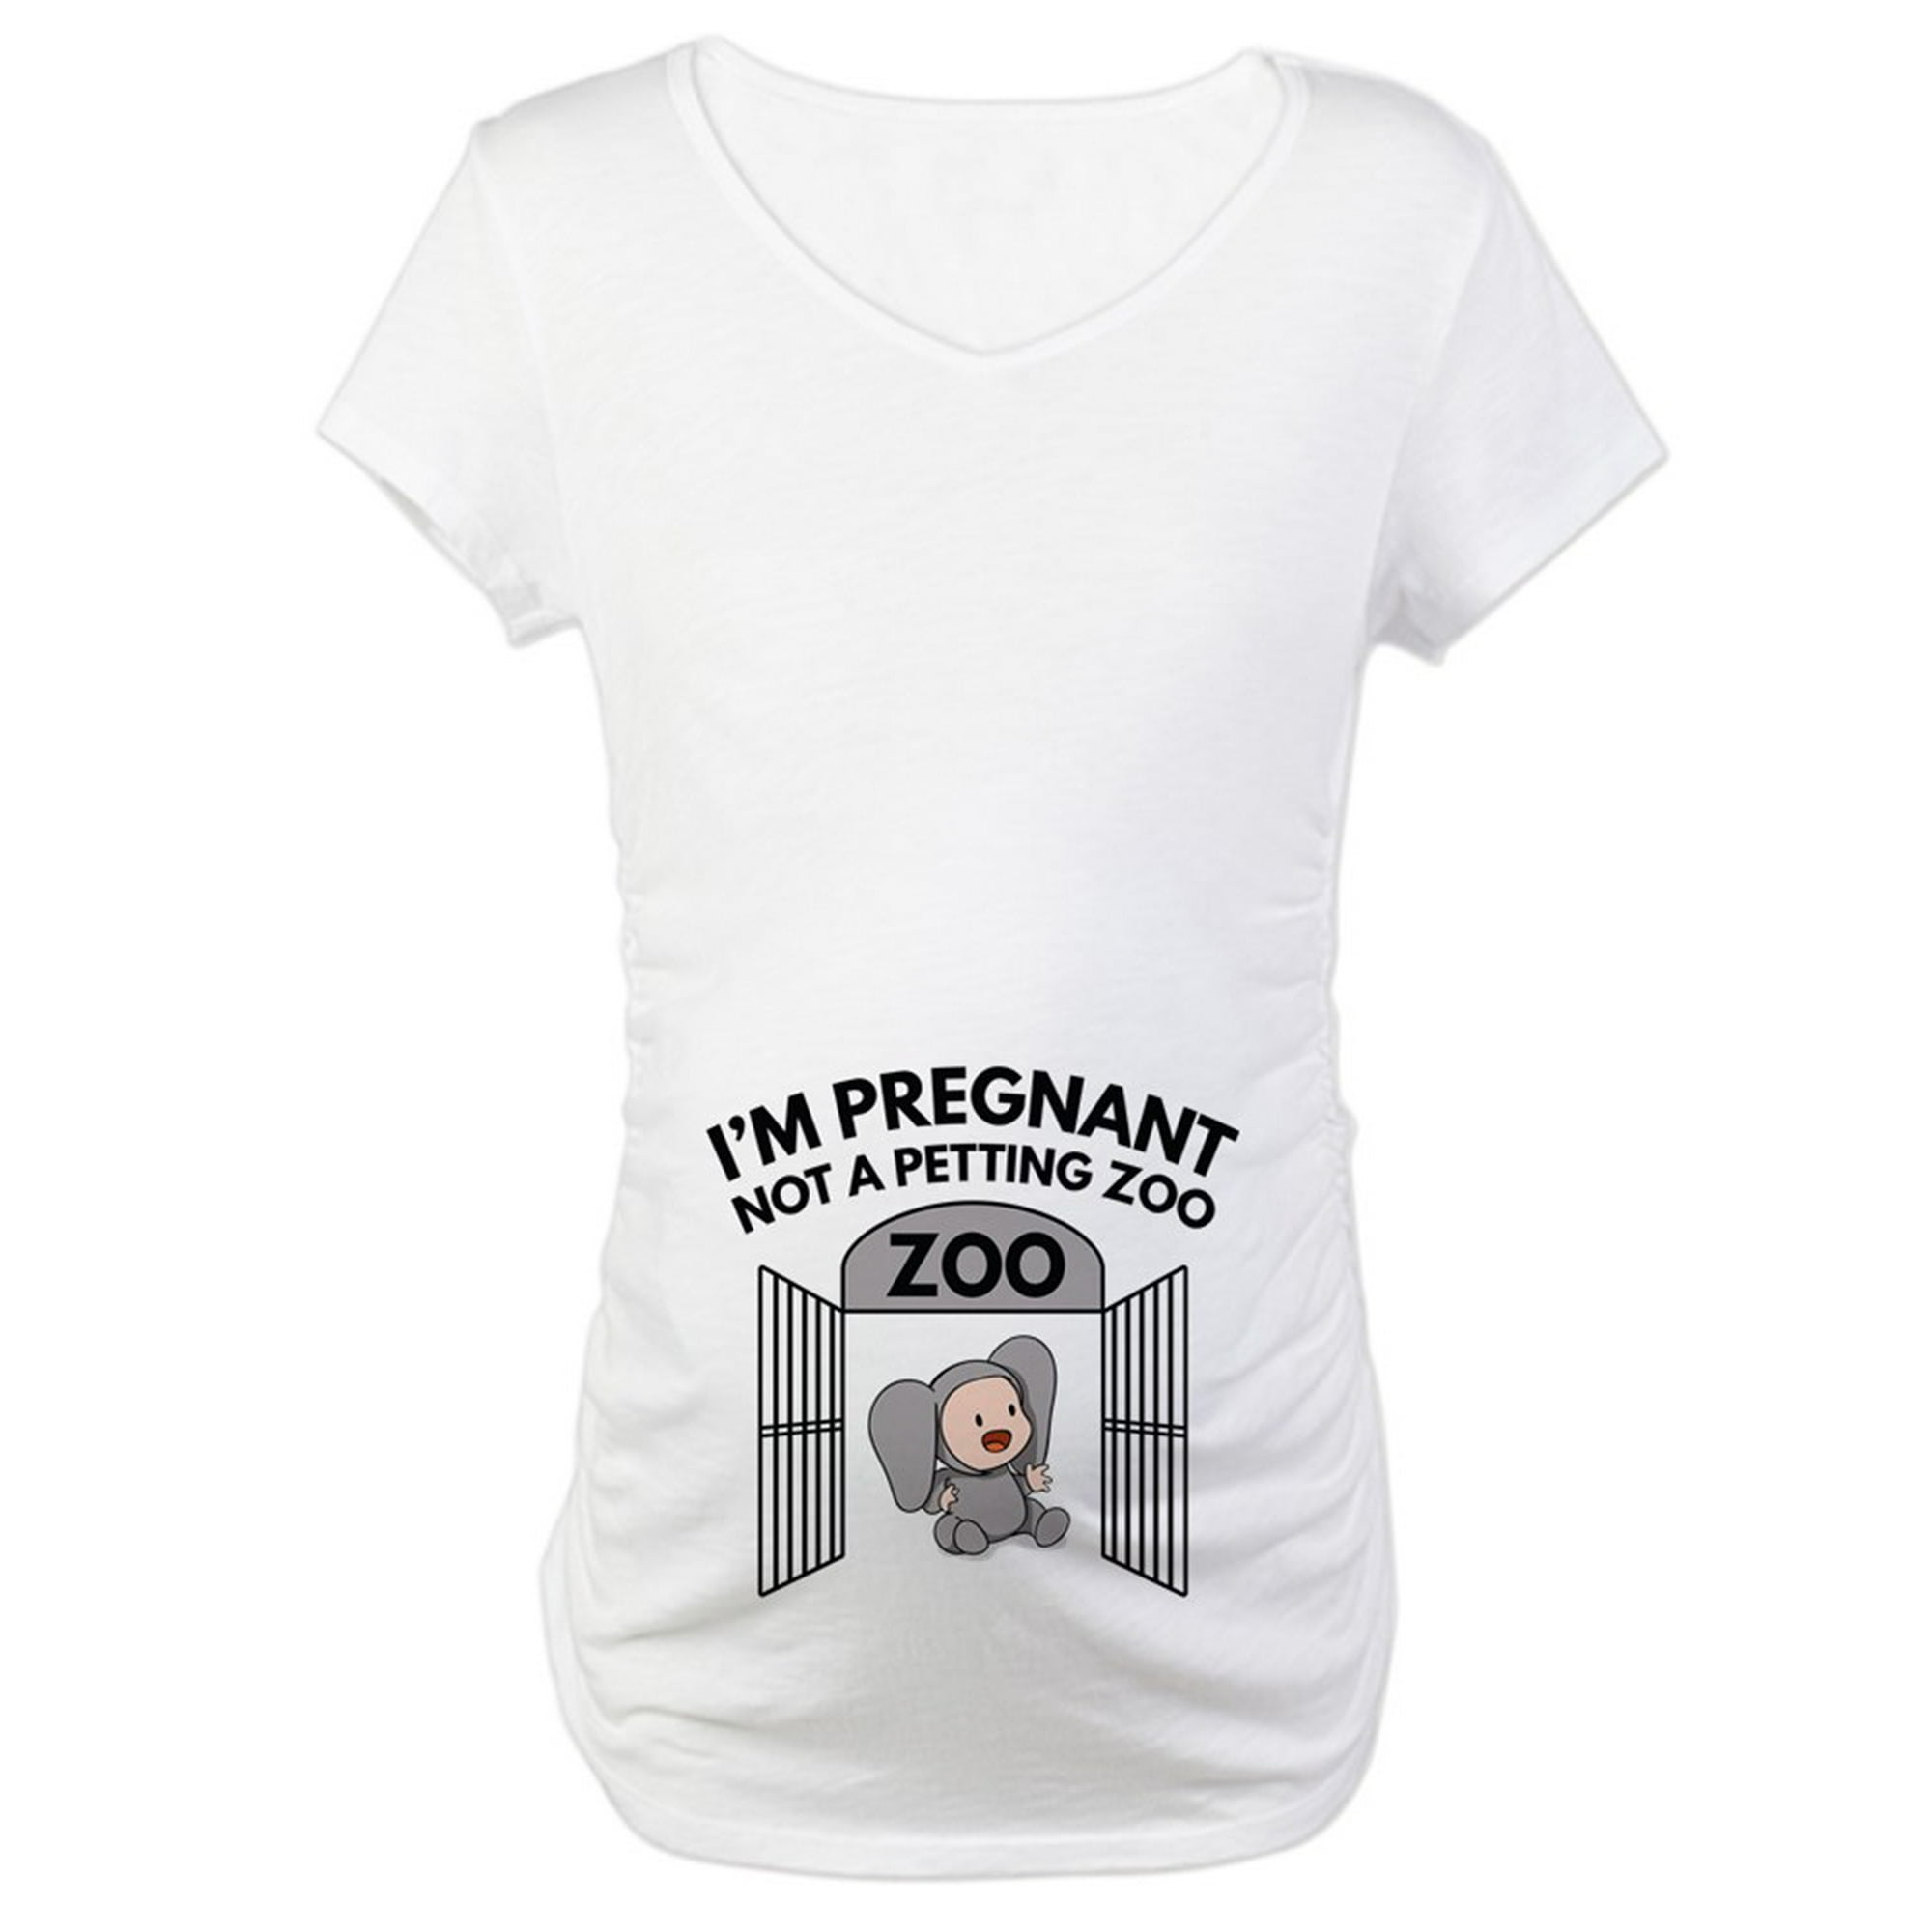 Cute & Funny Maternity Shirts for Your Pregnancy